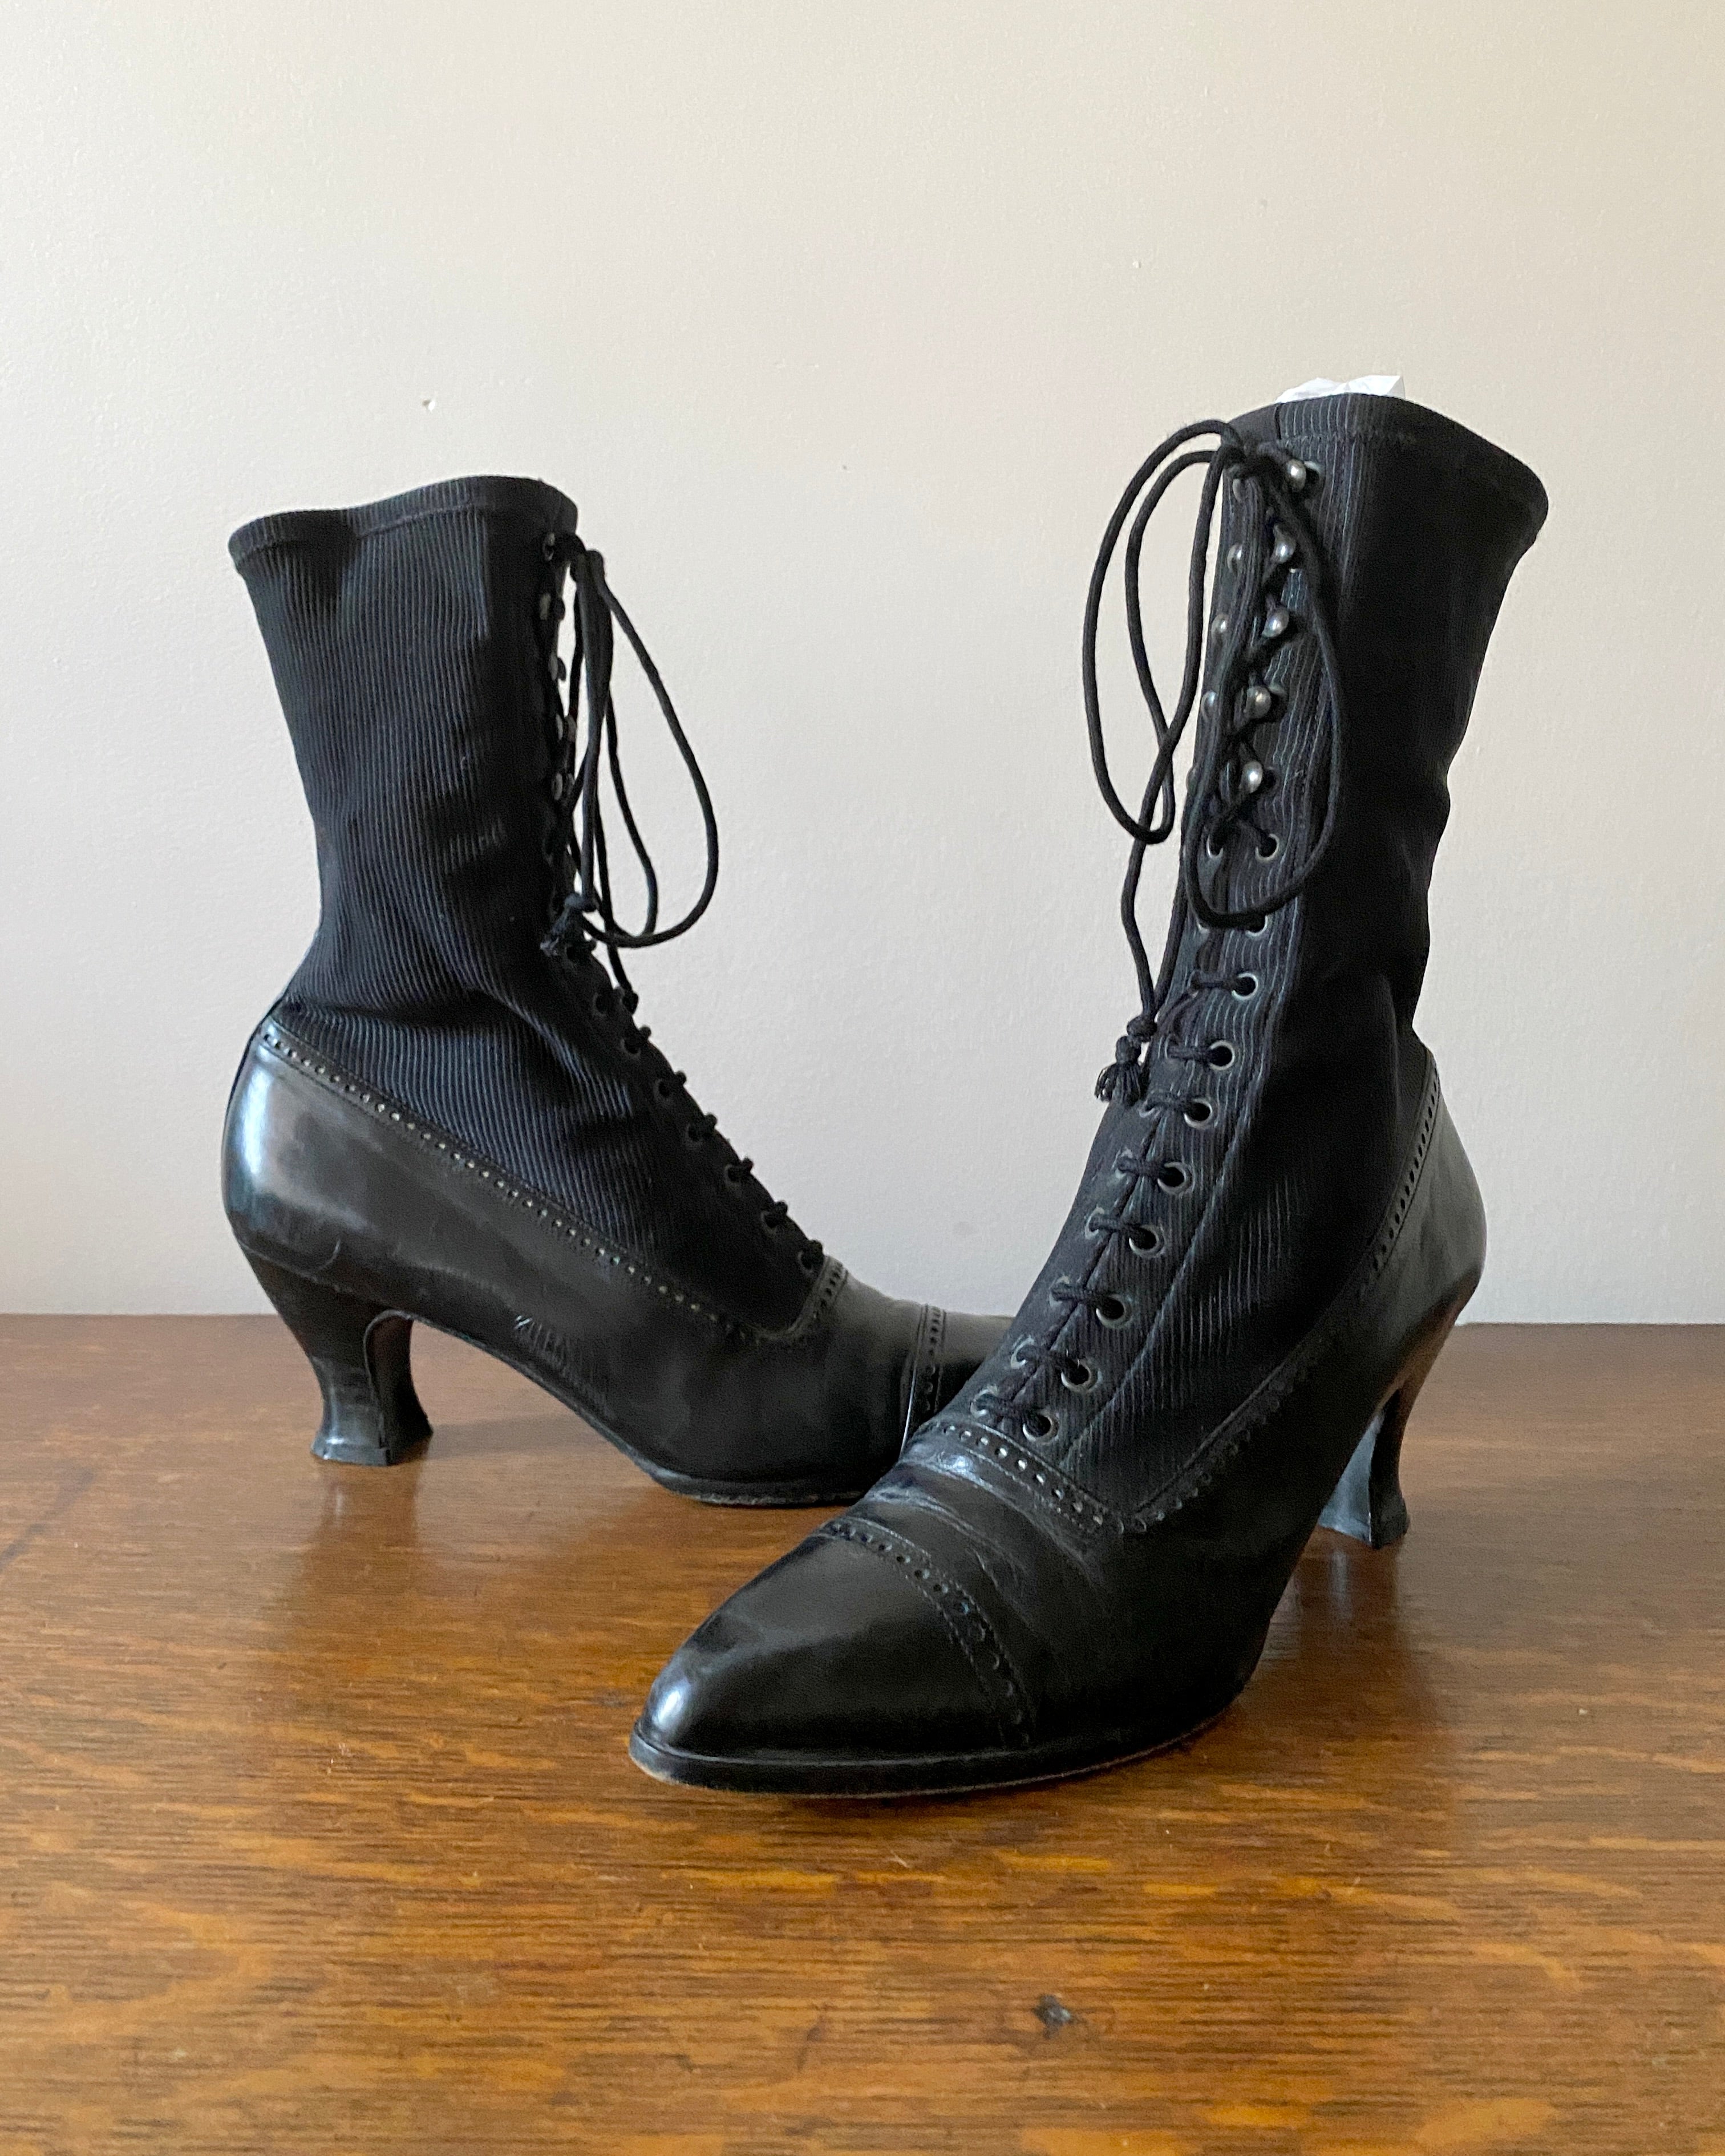 Vintage 1990s STUART WEITZMAN for Browns Shoes Black Victorian Lace Up Steampunk Booties 7